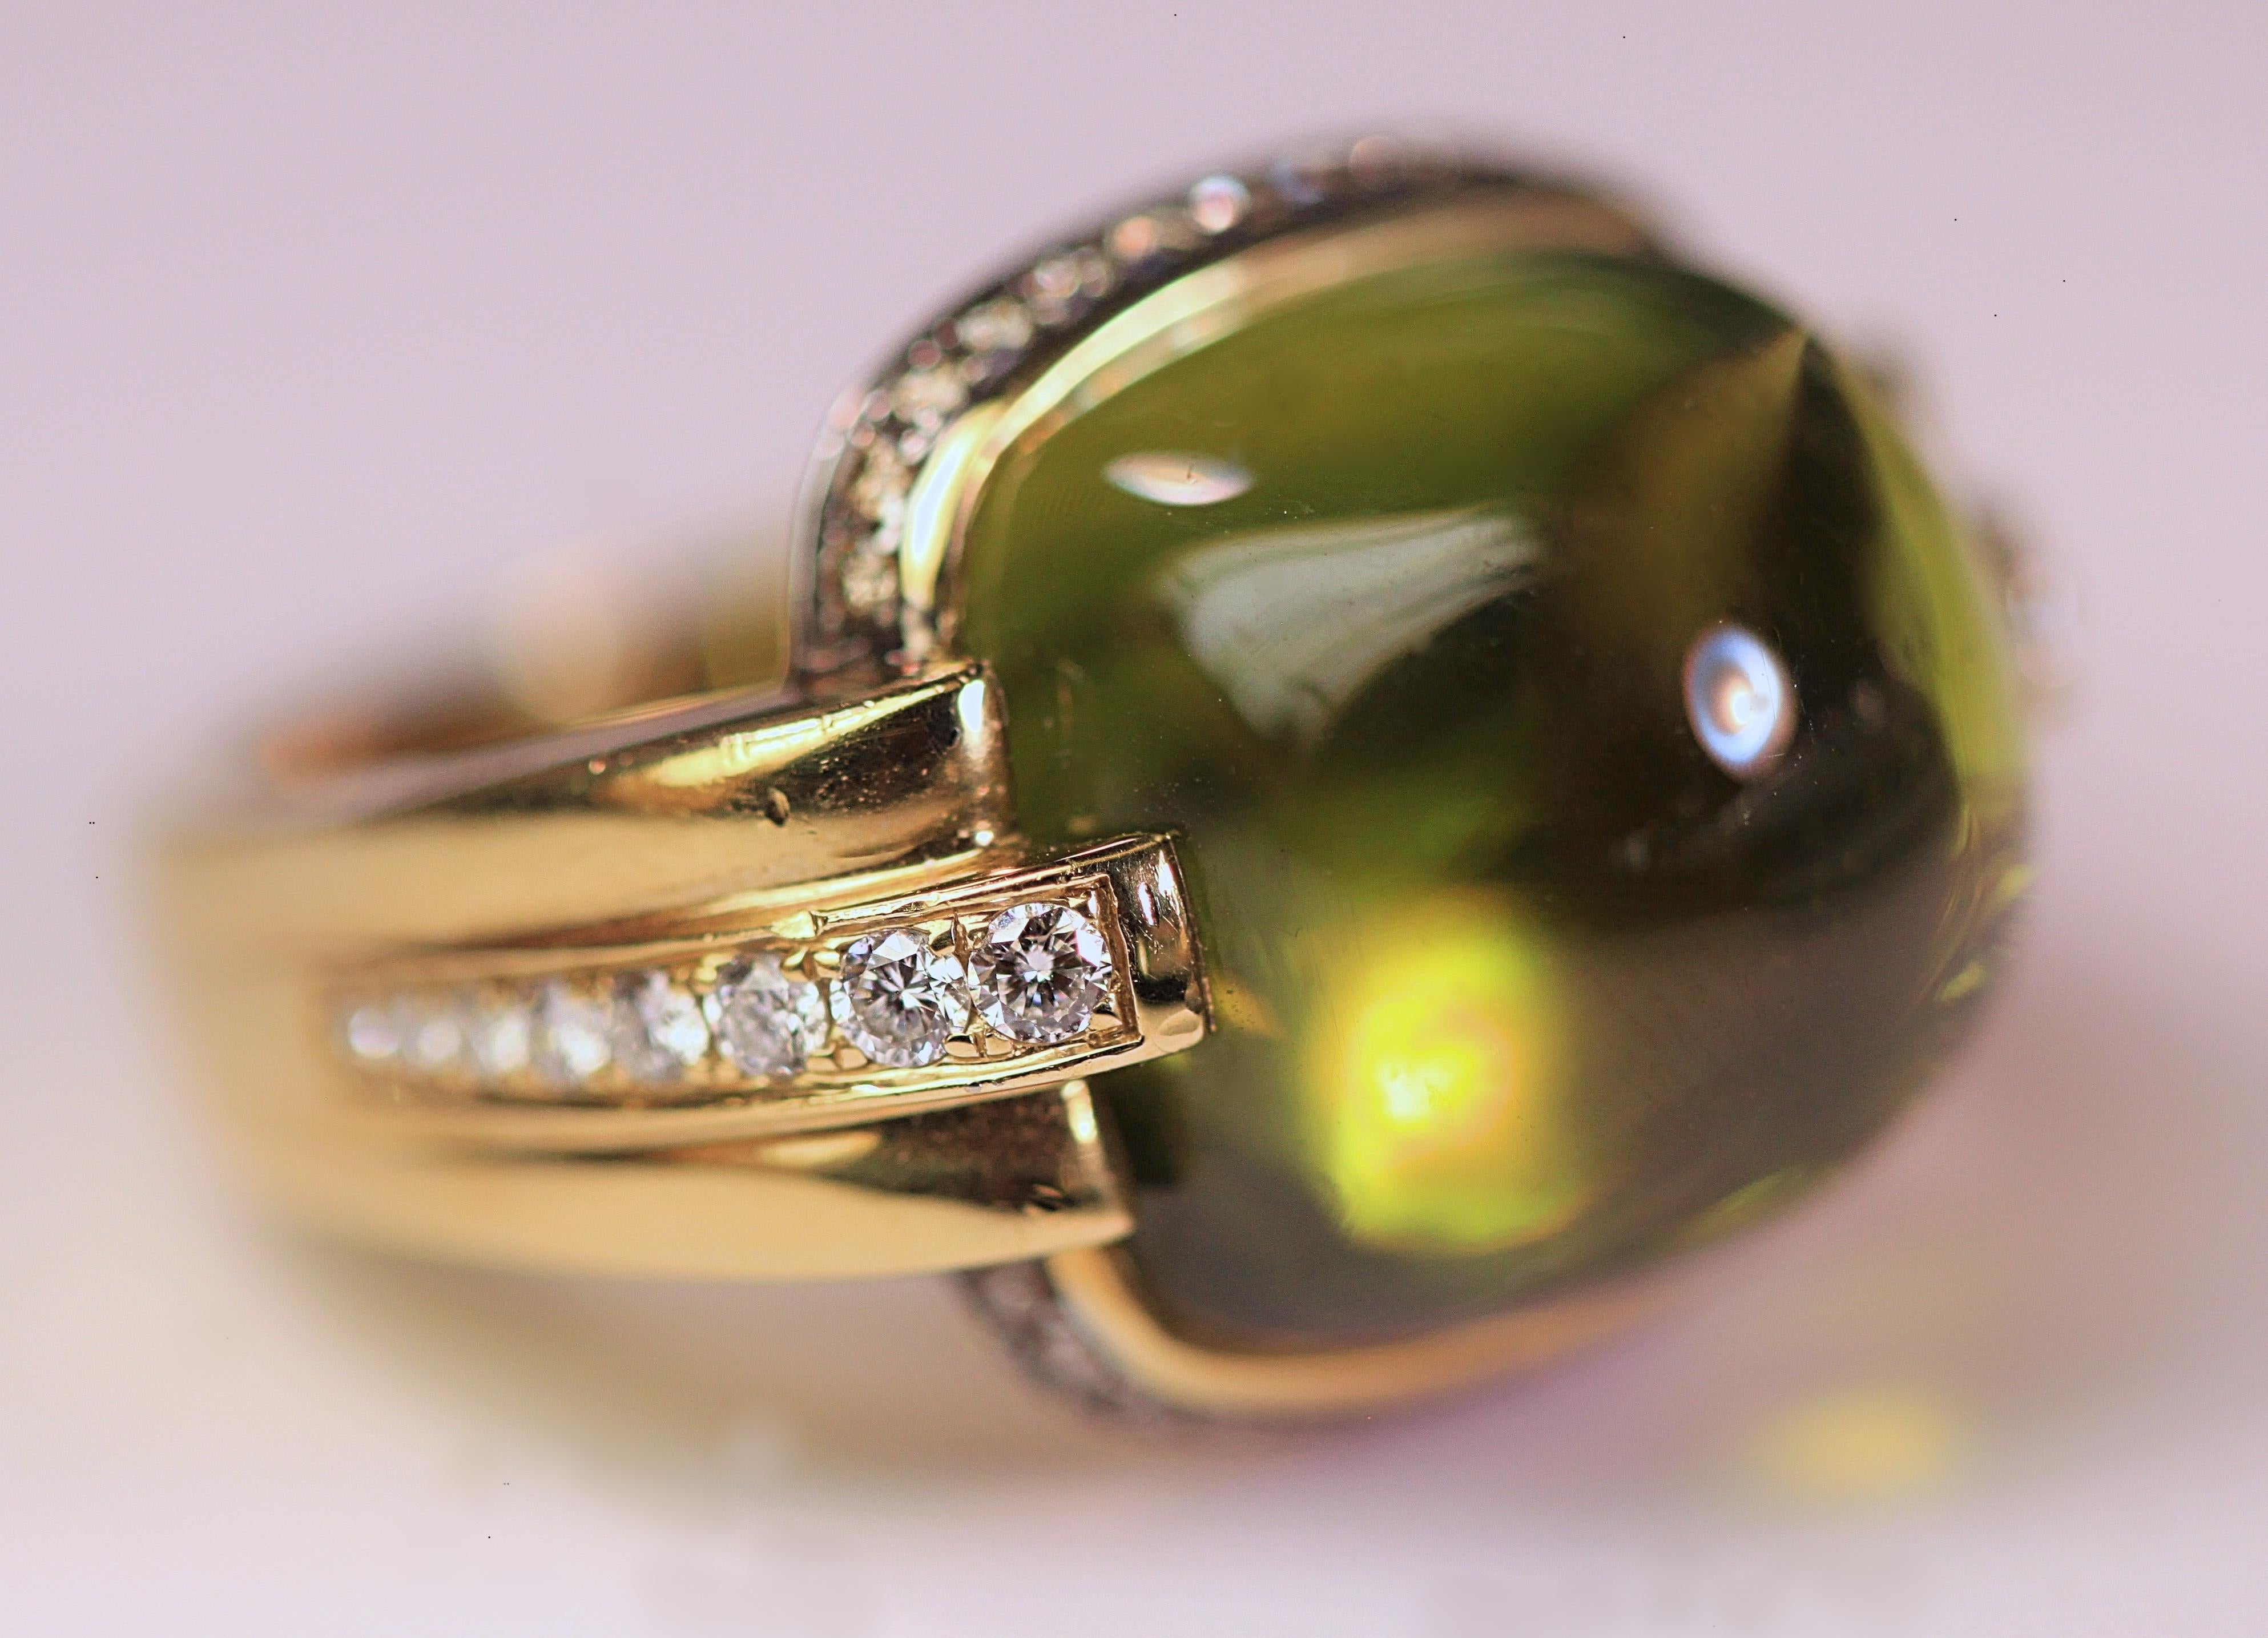 A beautiful cabochon peridot and diamond ring that was designed by Frederic Sage.  The ring is 18K yellow gold with diamonds along the sides and around the top. The ring is a size 7 1/2, but it can be resized. There are no visible inclusions to the